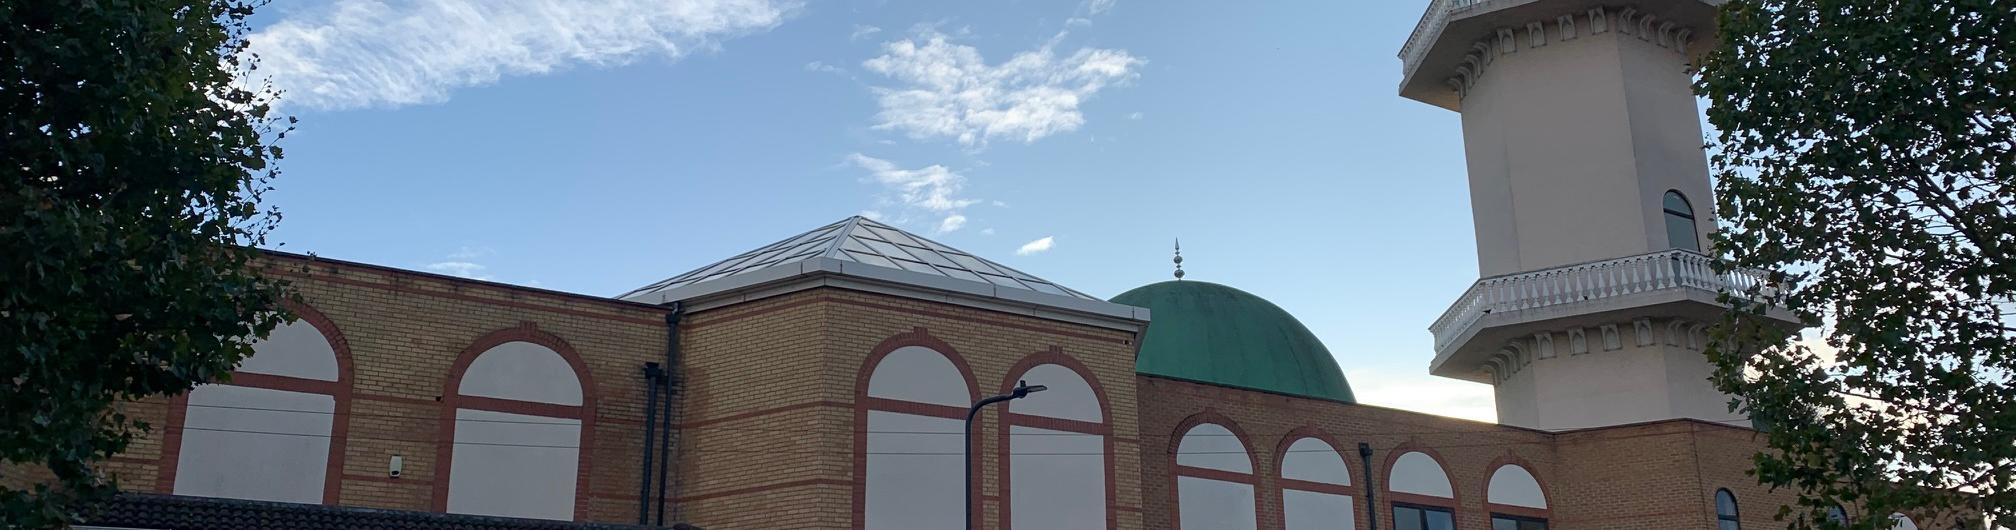 Photo of the top of a building with a green dome.